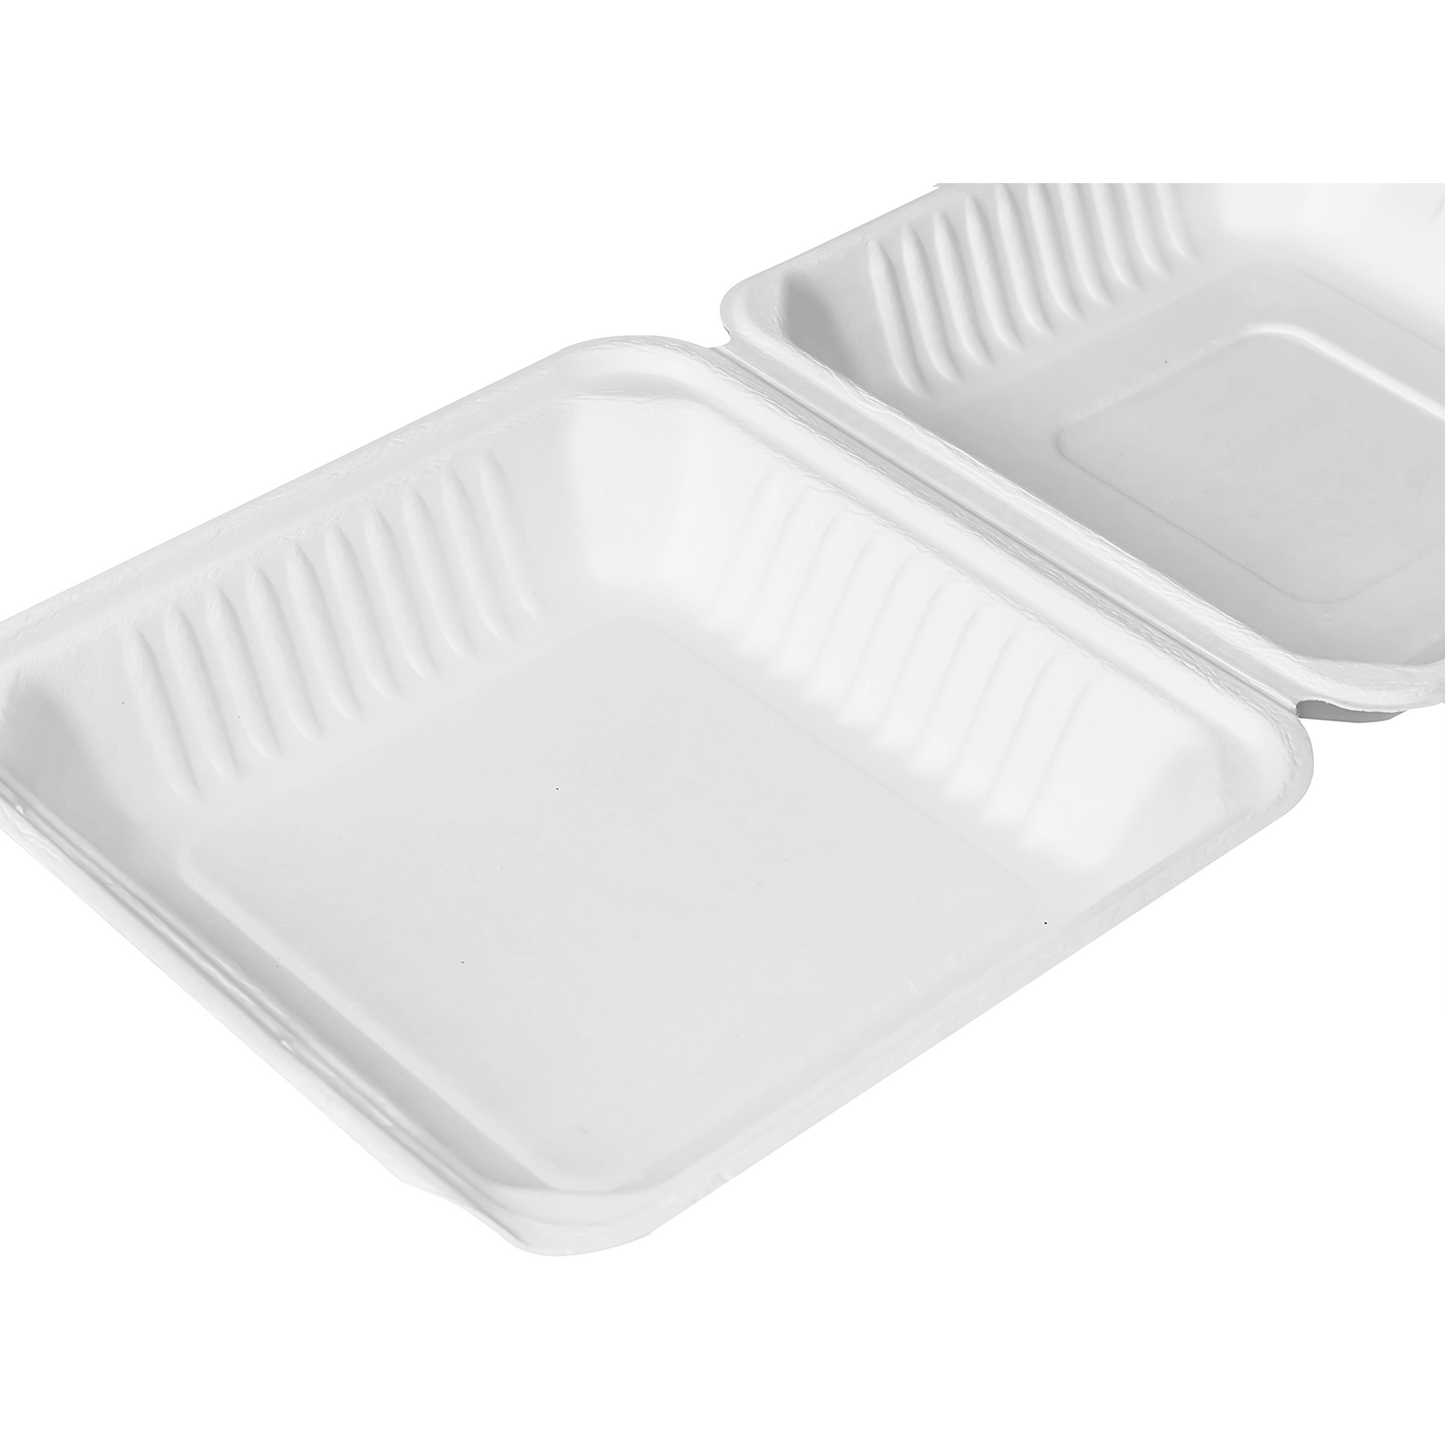 9"x9" Bagasse Hinged Container